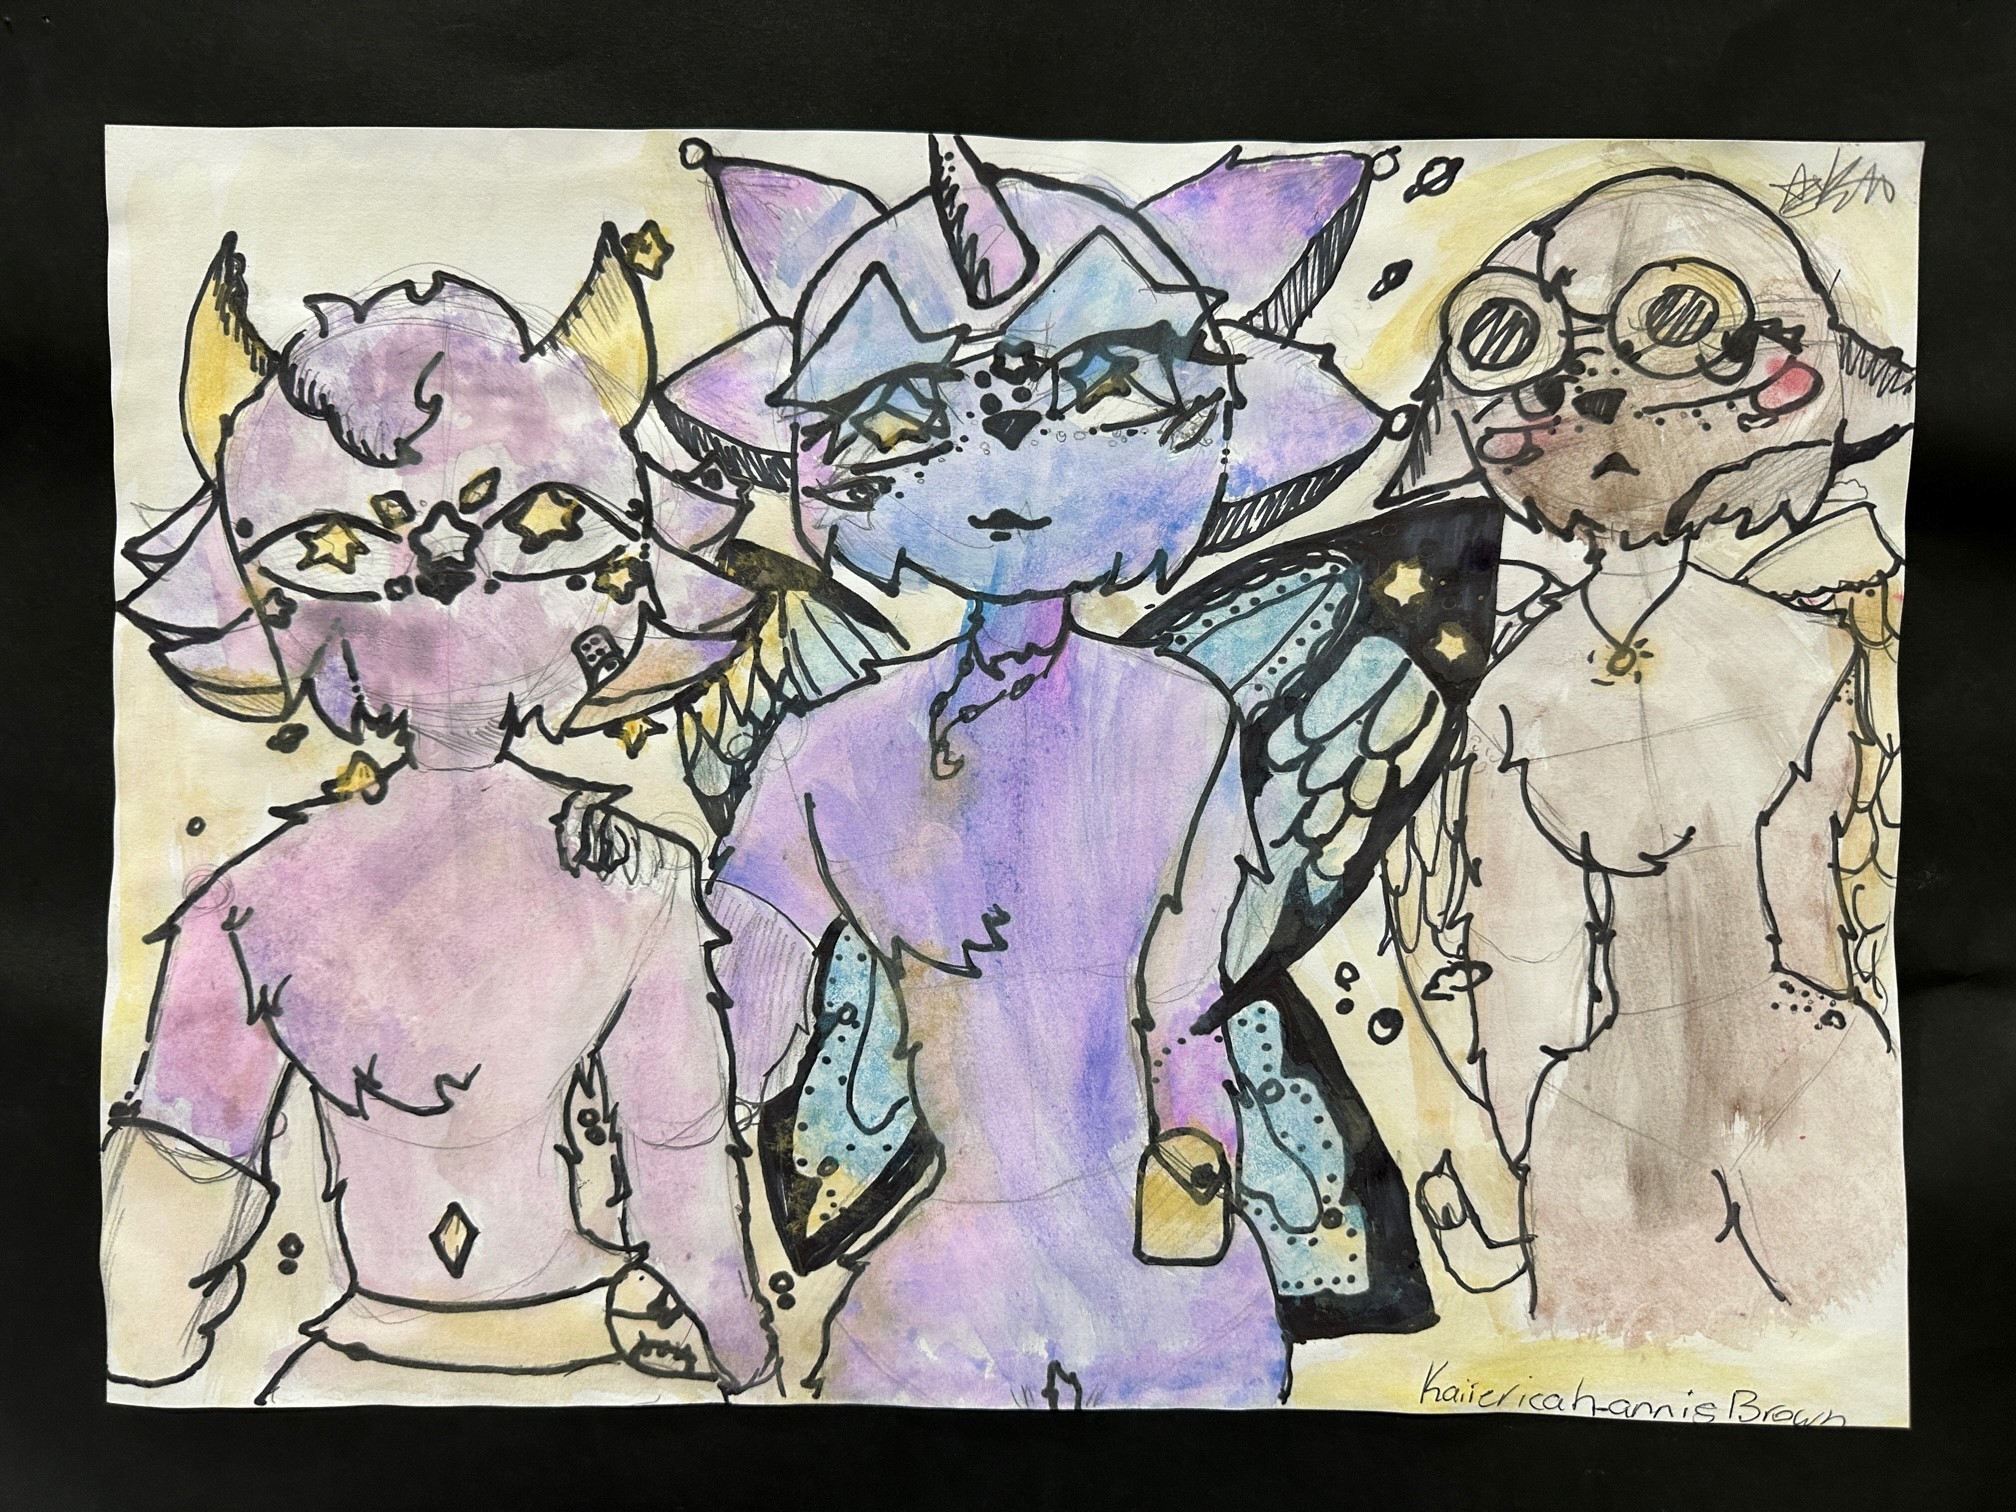 Watercolour art of 3 mythical creatures resembling cats with a space age theme created by student